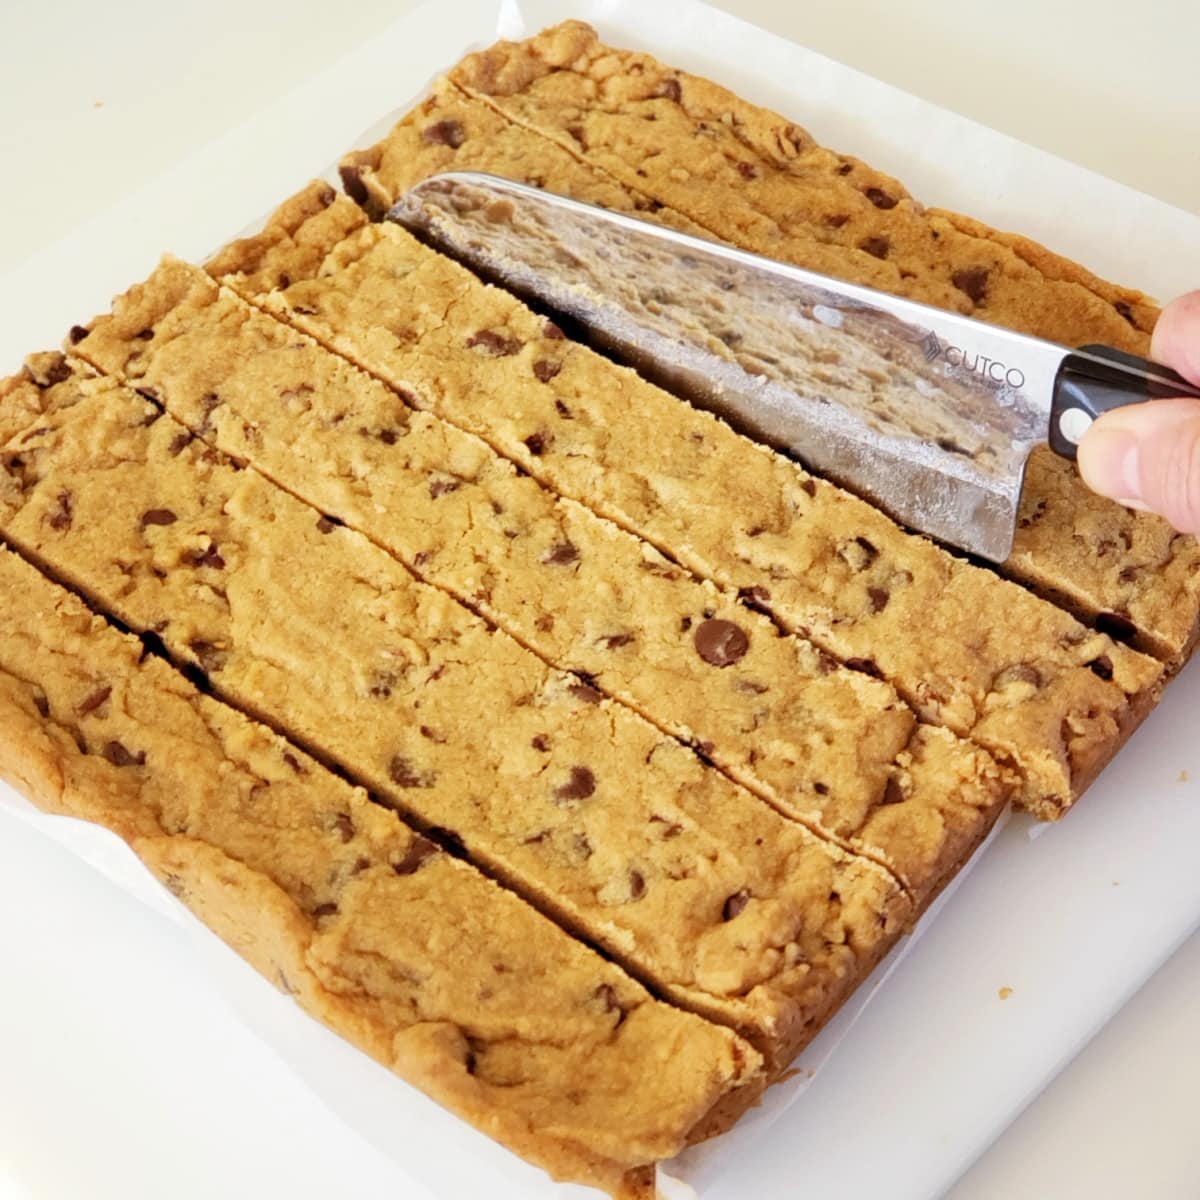 Hand holding a large knife cuts cookies into long strips